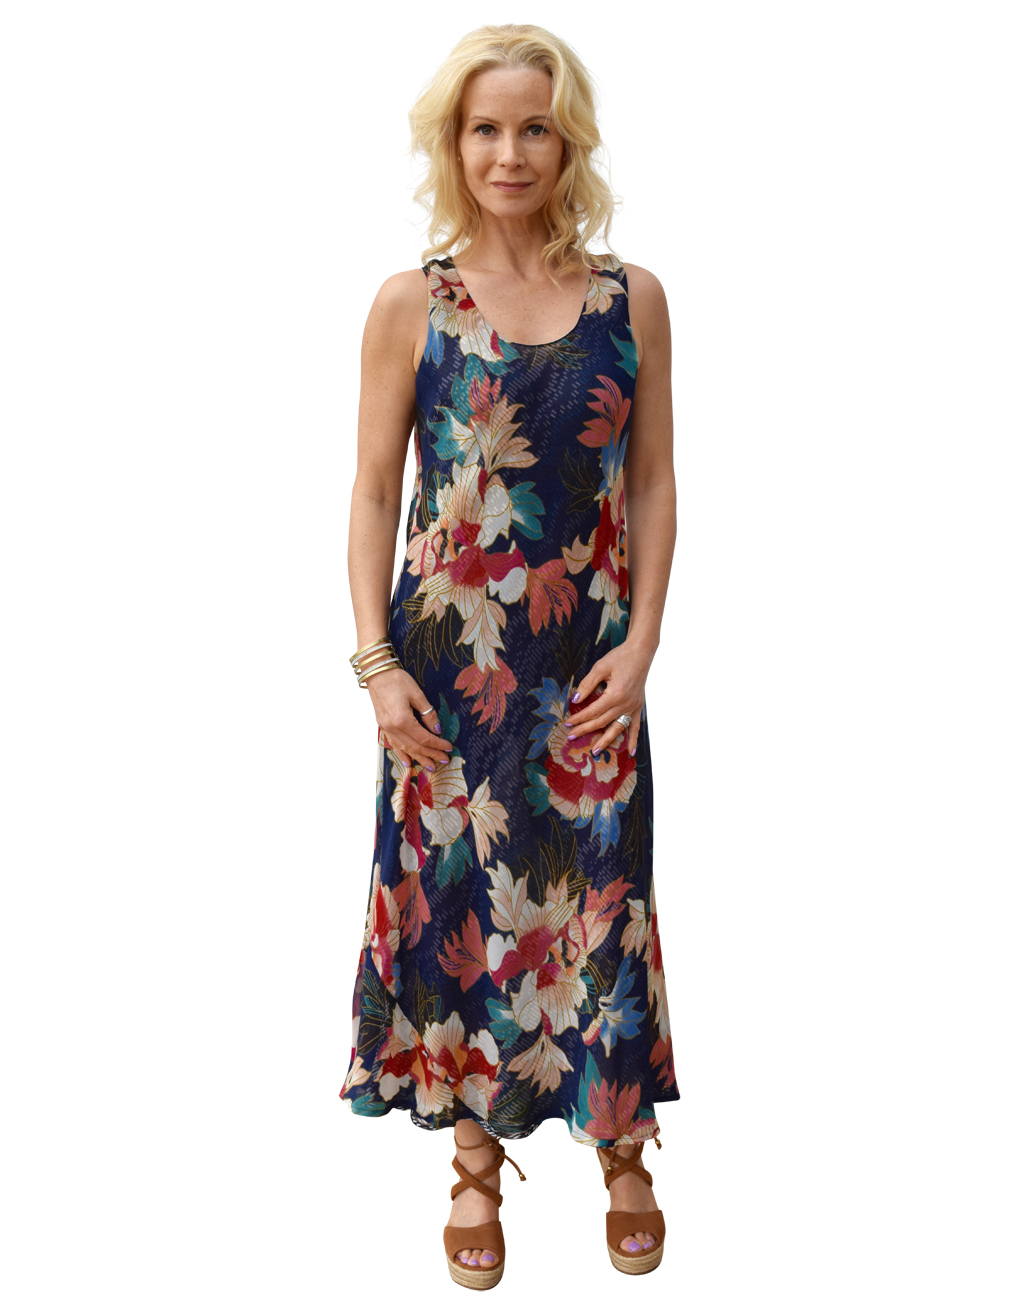 Paramour Reversible 2 in 1 Navy Floral Dress5